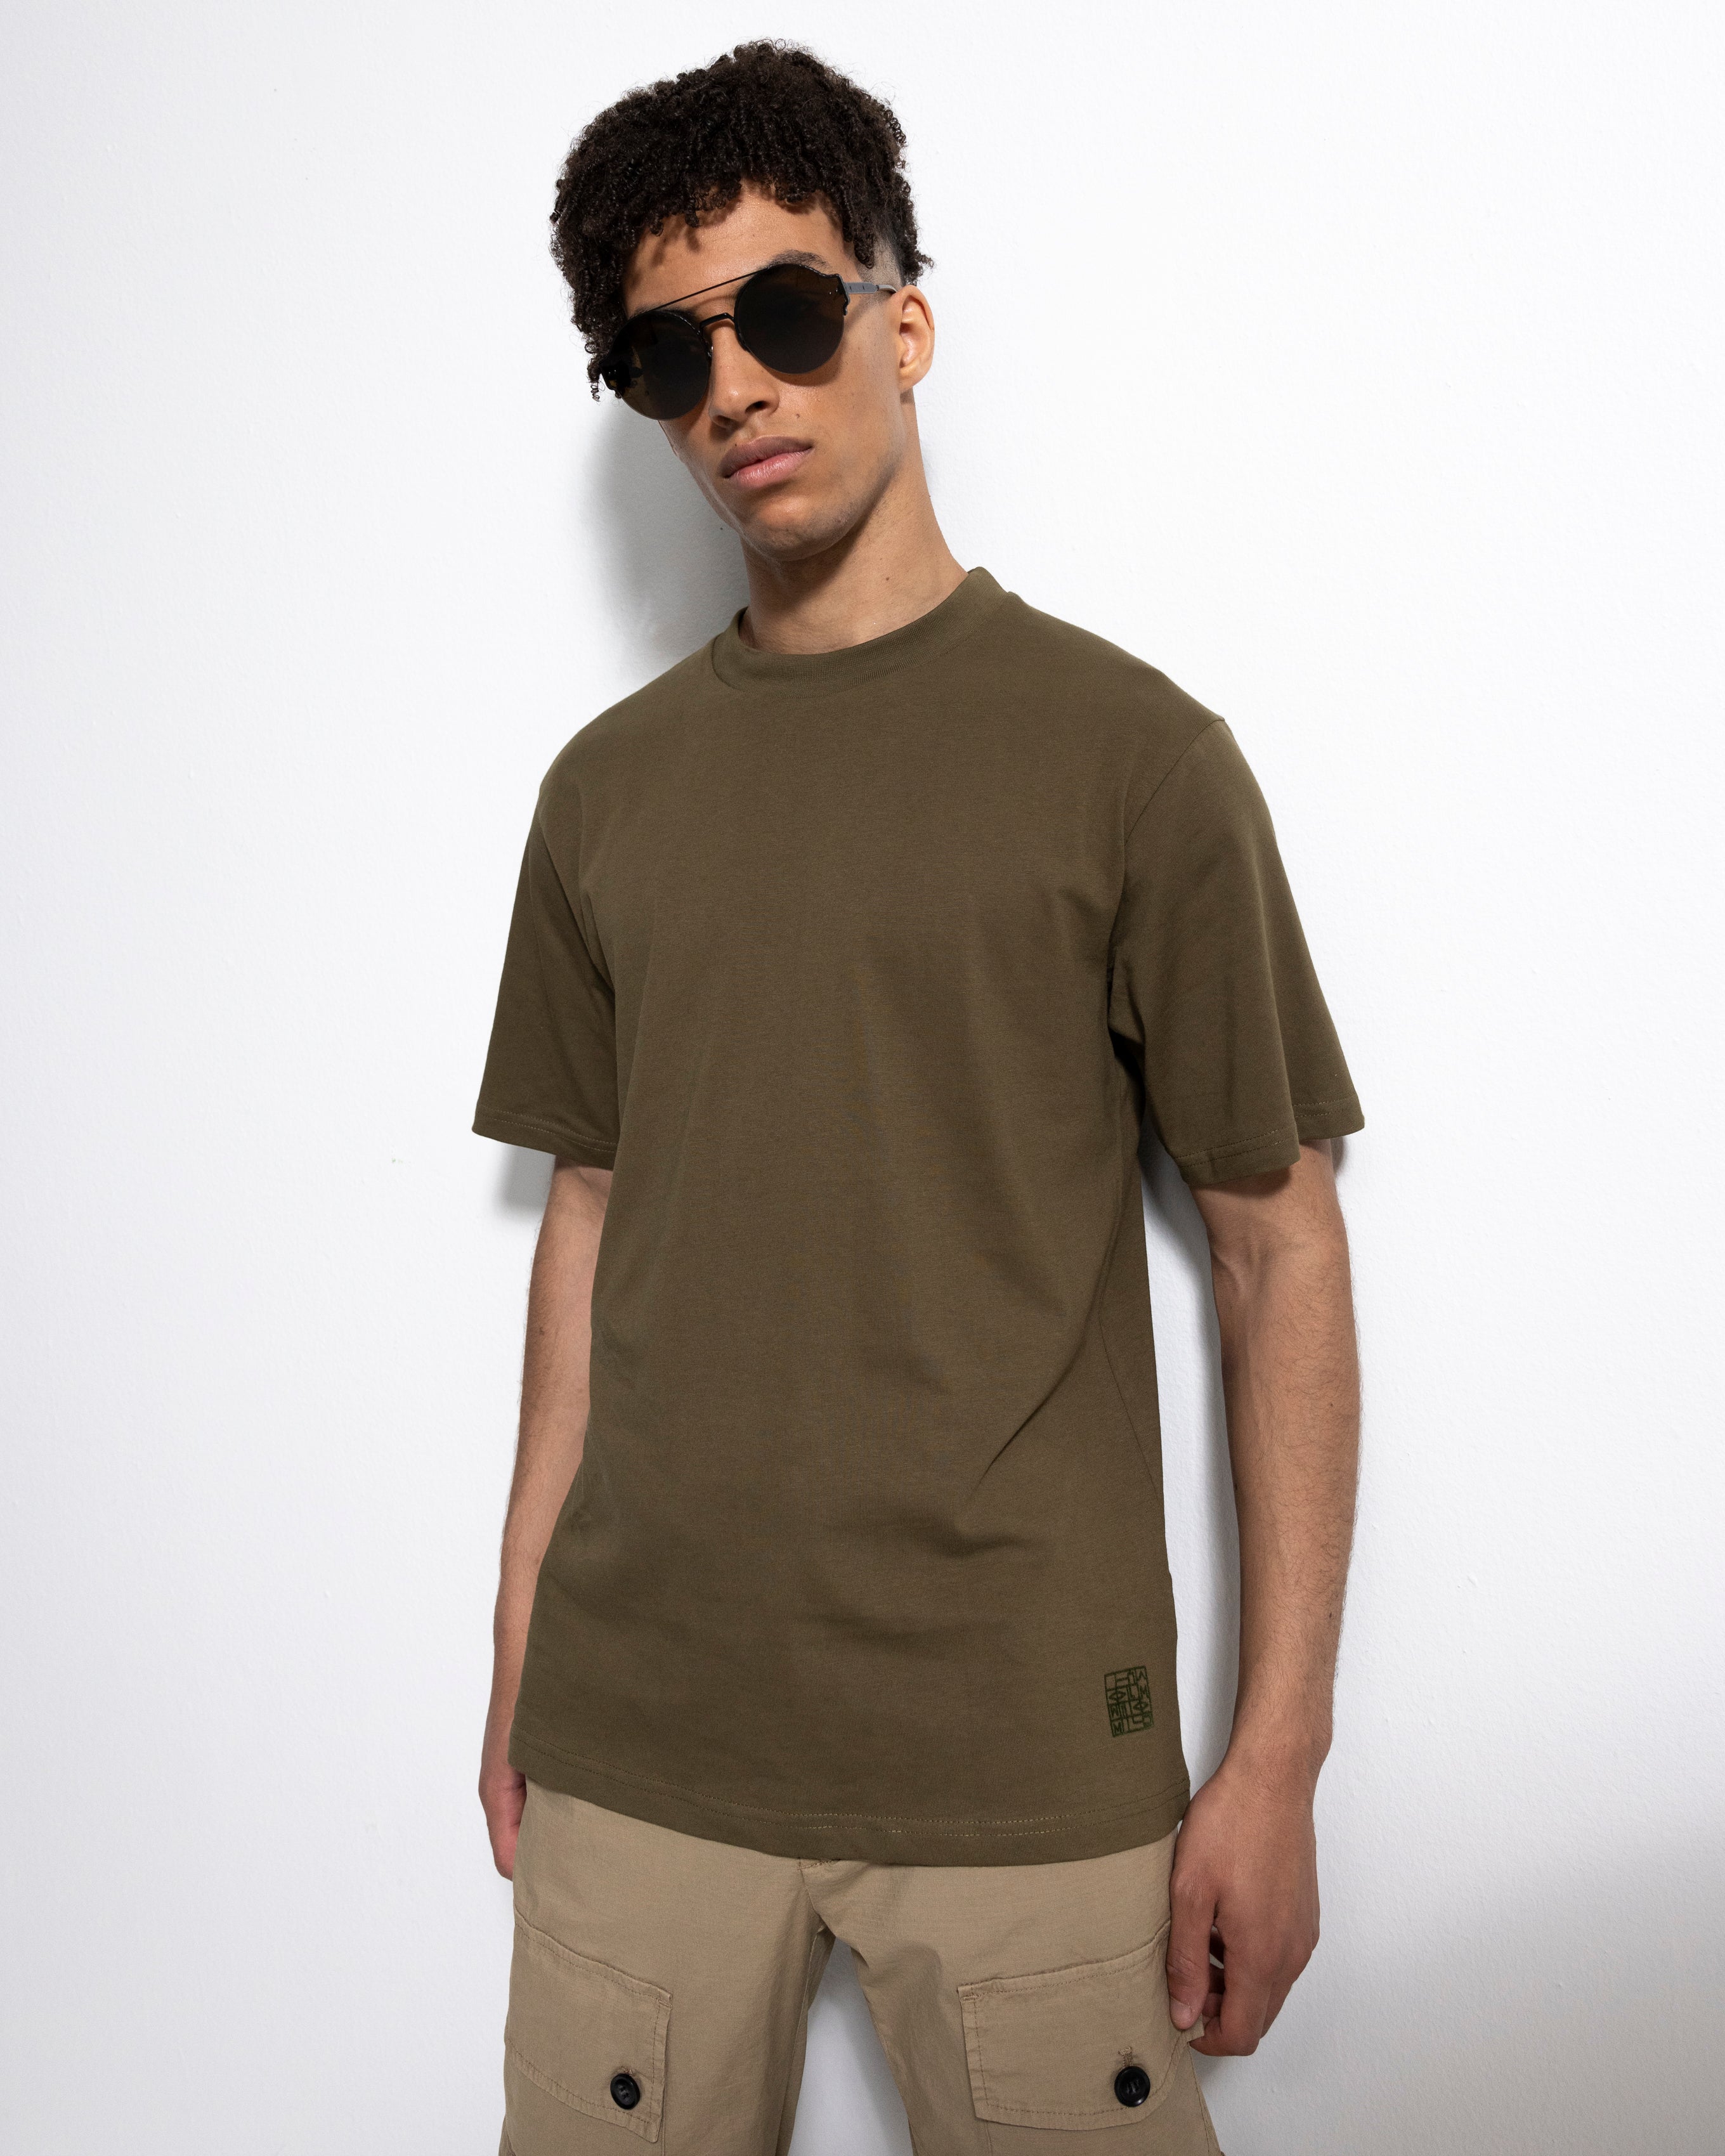 Skate Tee - Dk Moss Green-Ljung by Marcus Larsson